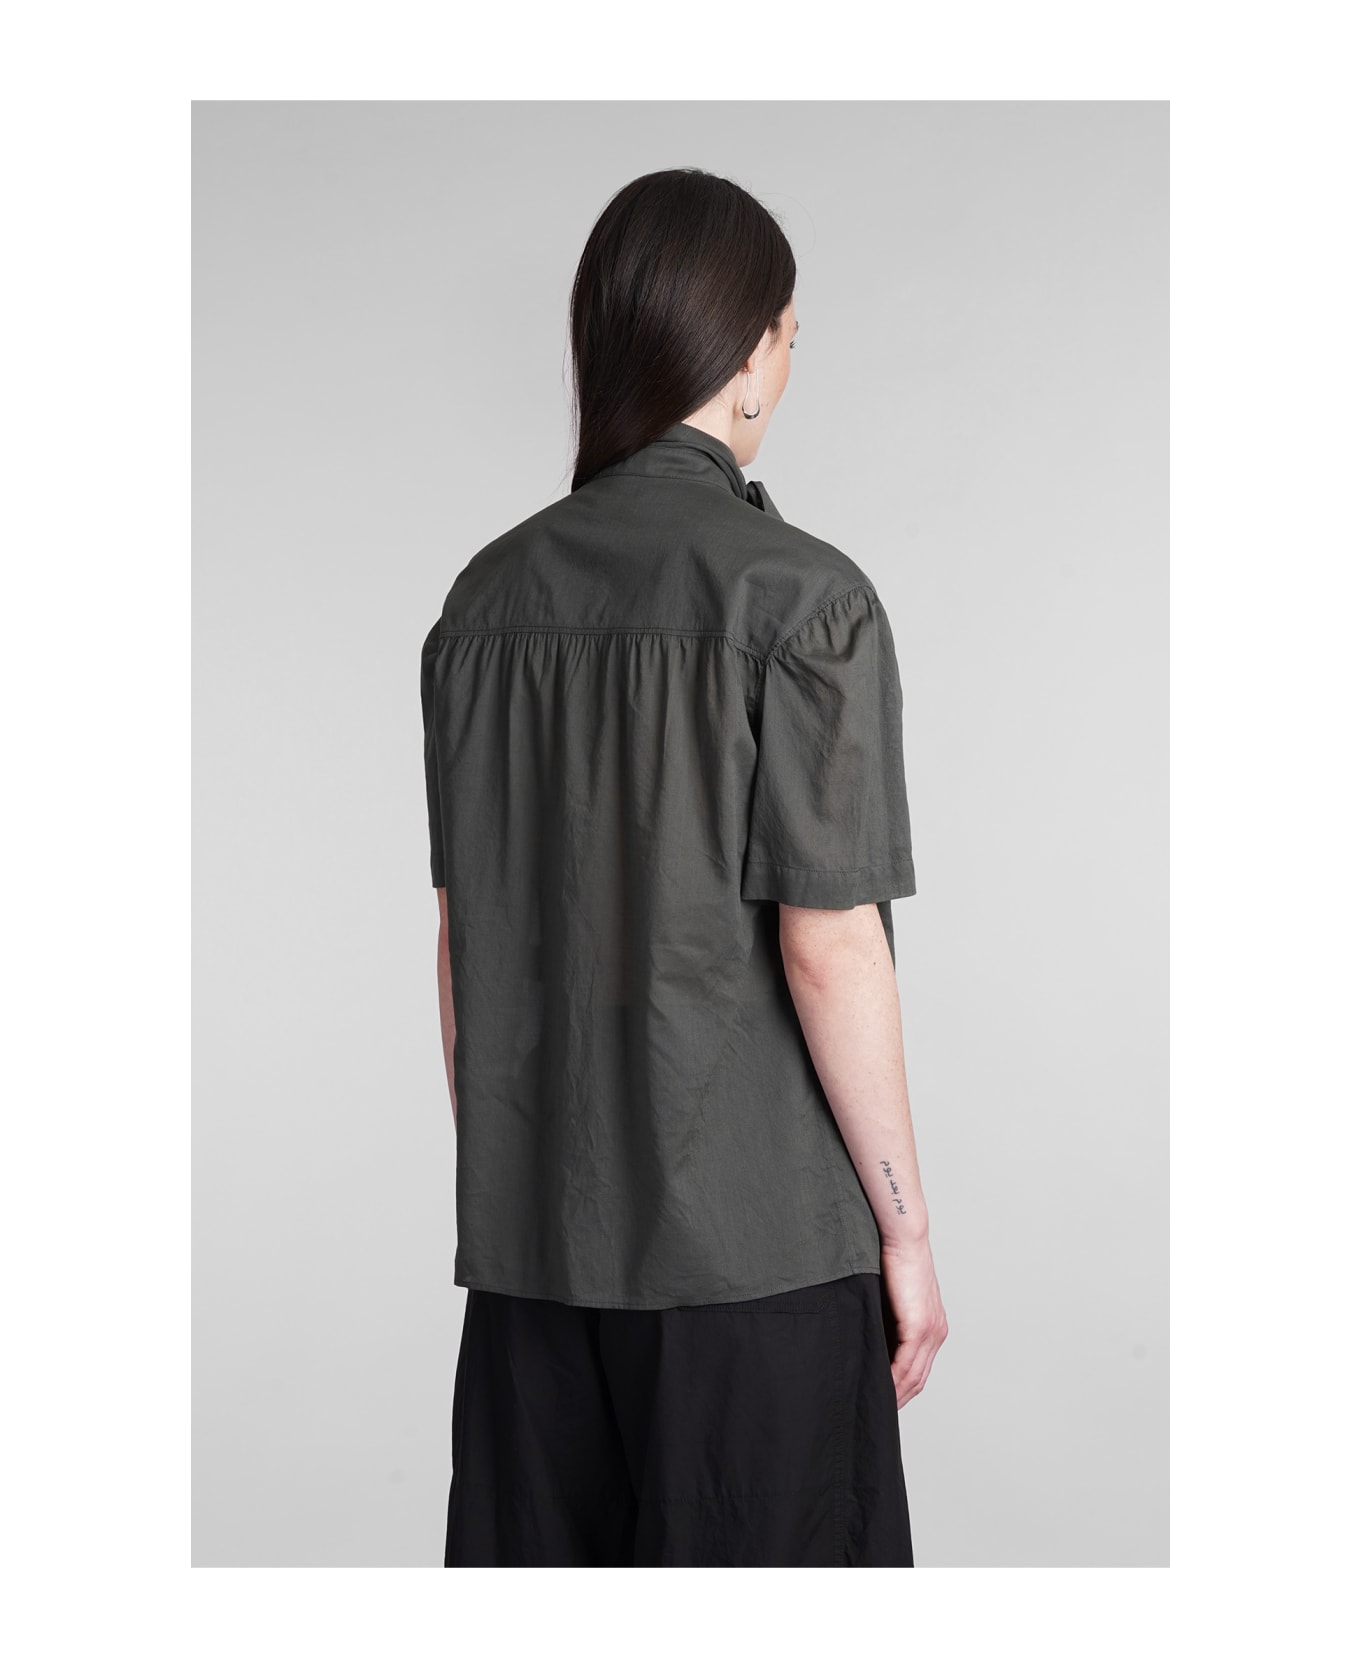 Lemaire Shirt In Green Cotton - Grey